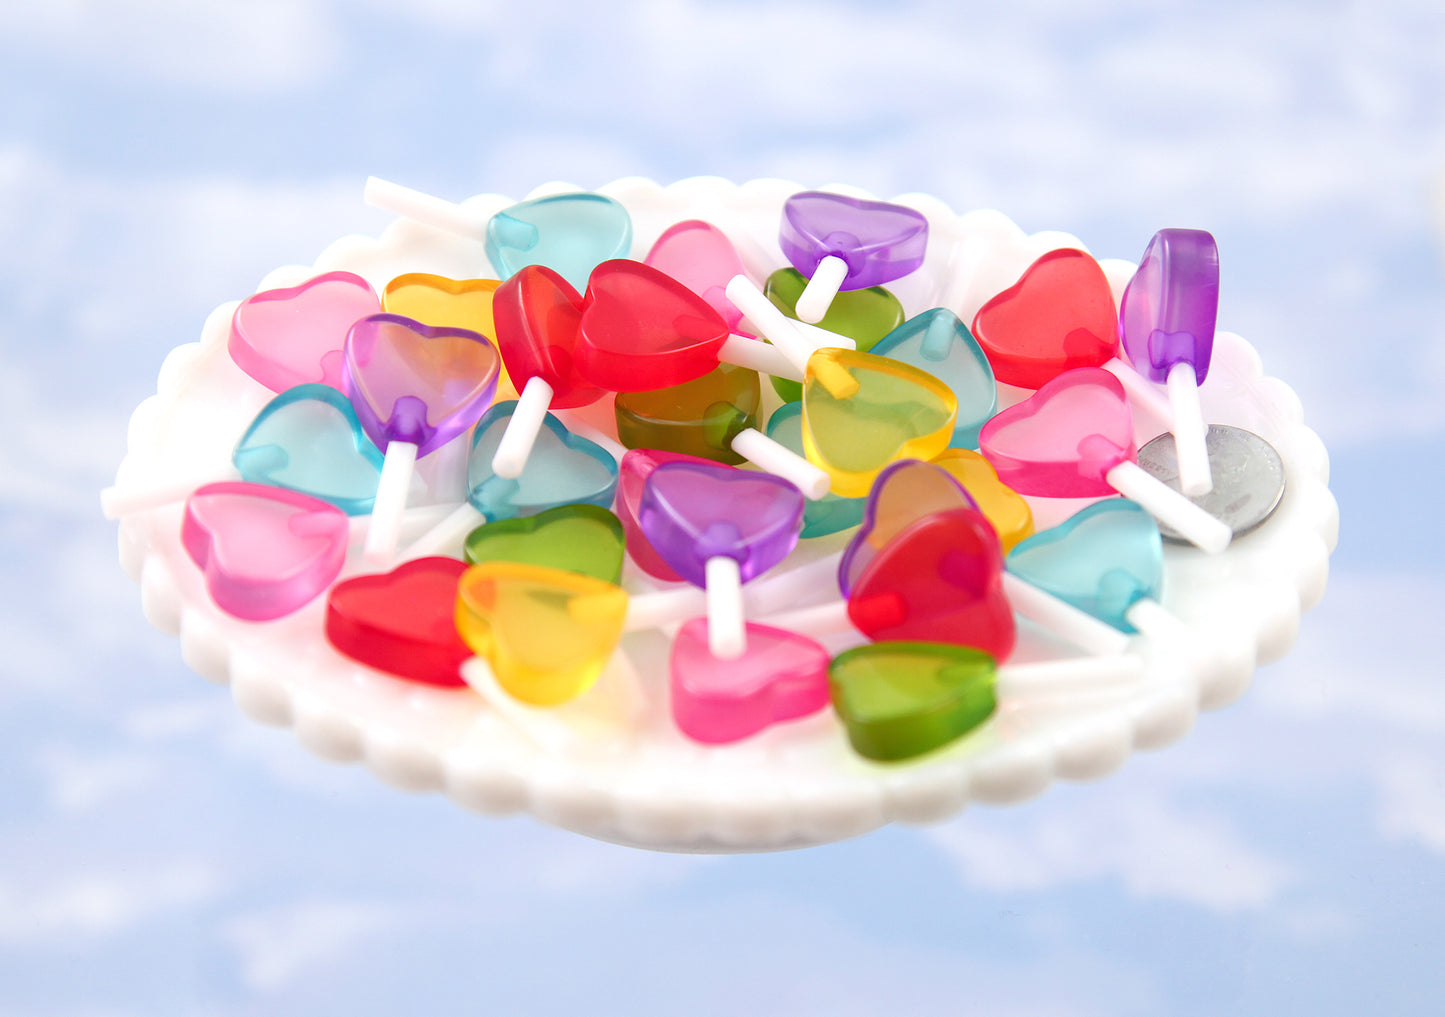 35mm Little Heart Shaped Fake Lollipop Faux Candy Acrylic or Resin Cabochons - A Rainbow of Colors - 6 pc set